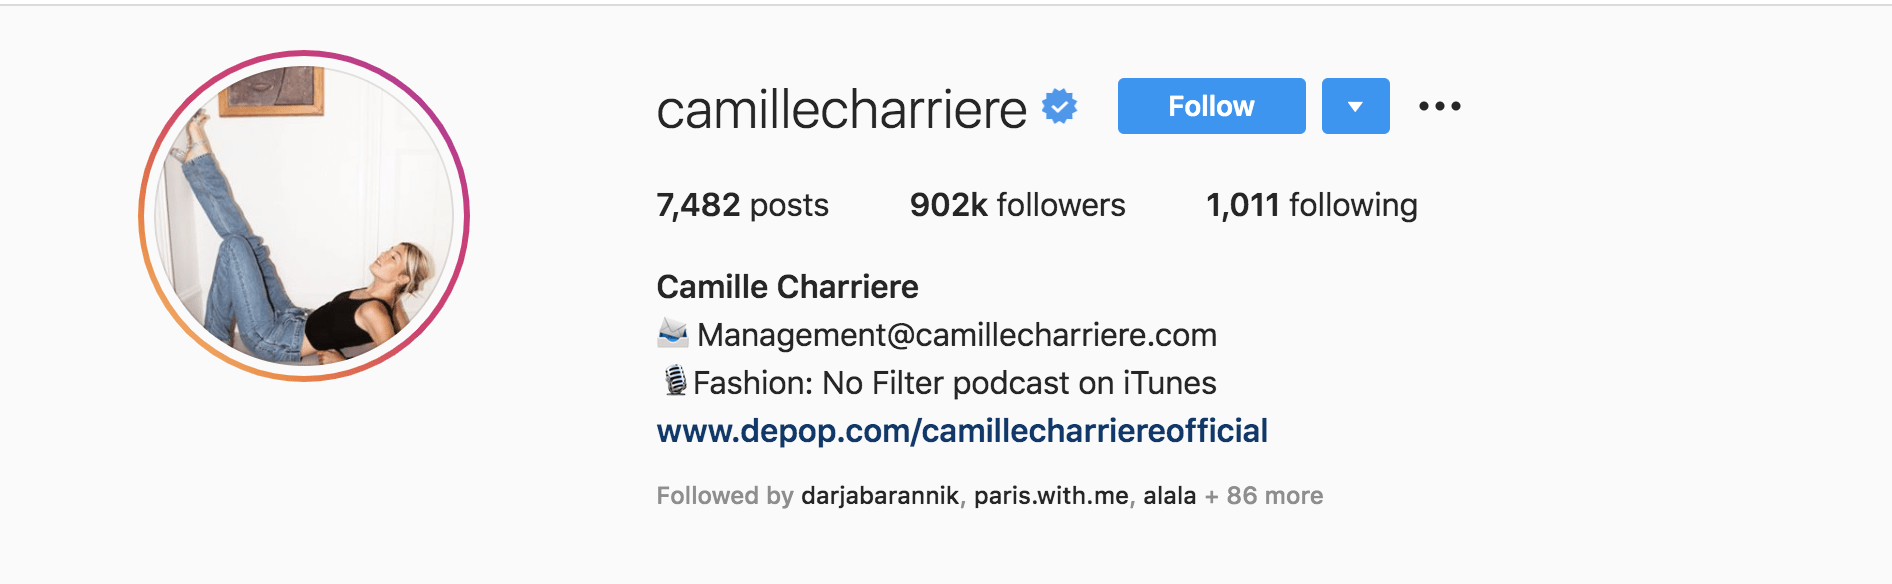 Top Fashion Influencers - Camille Charriere